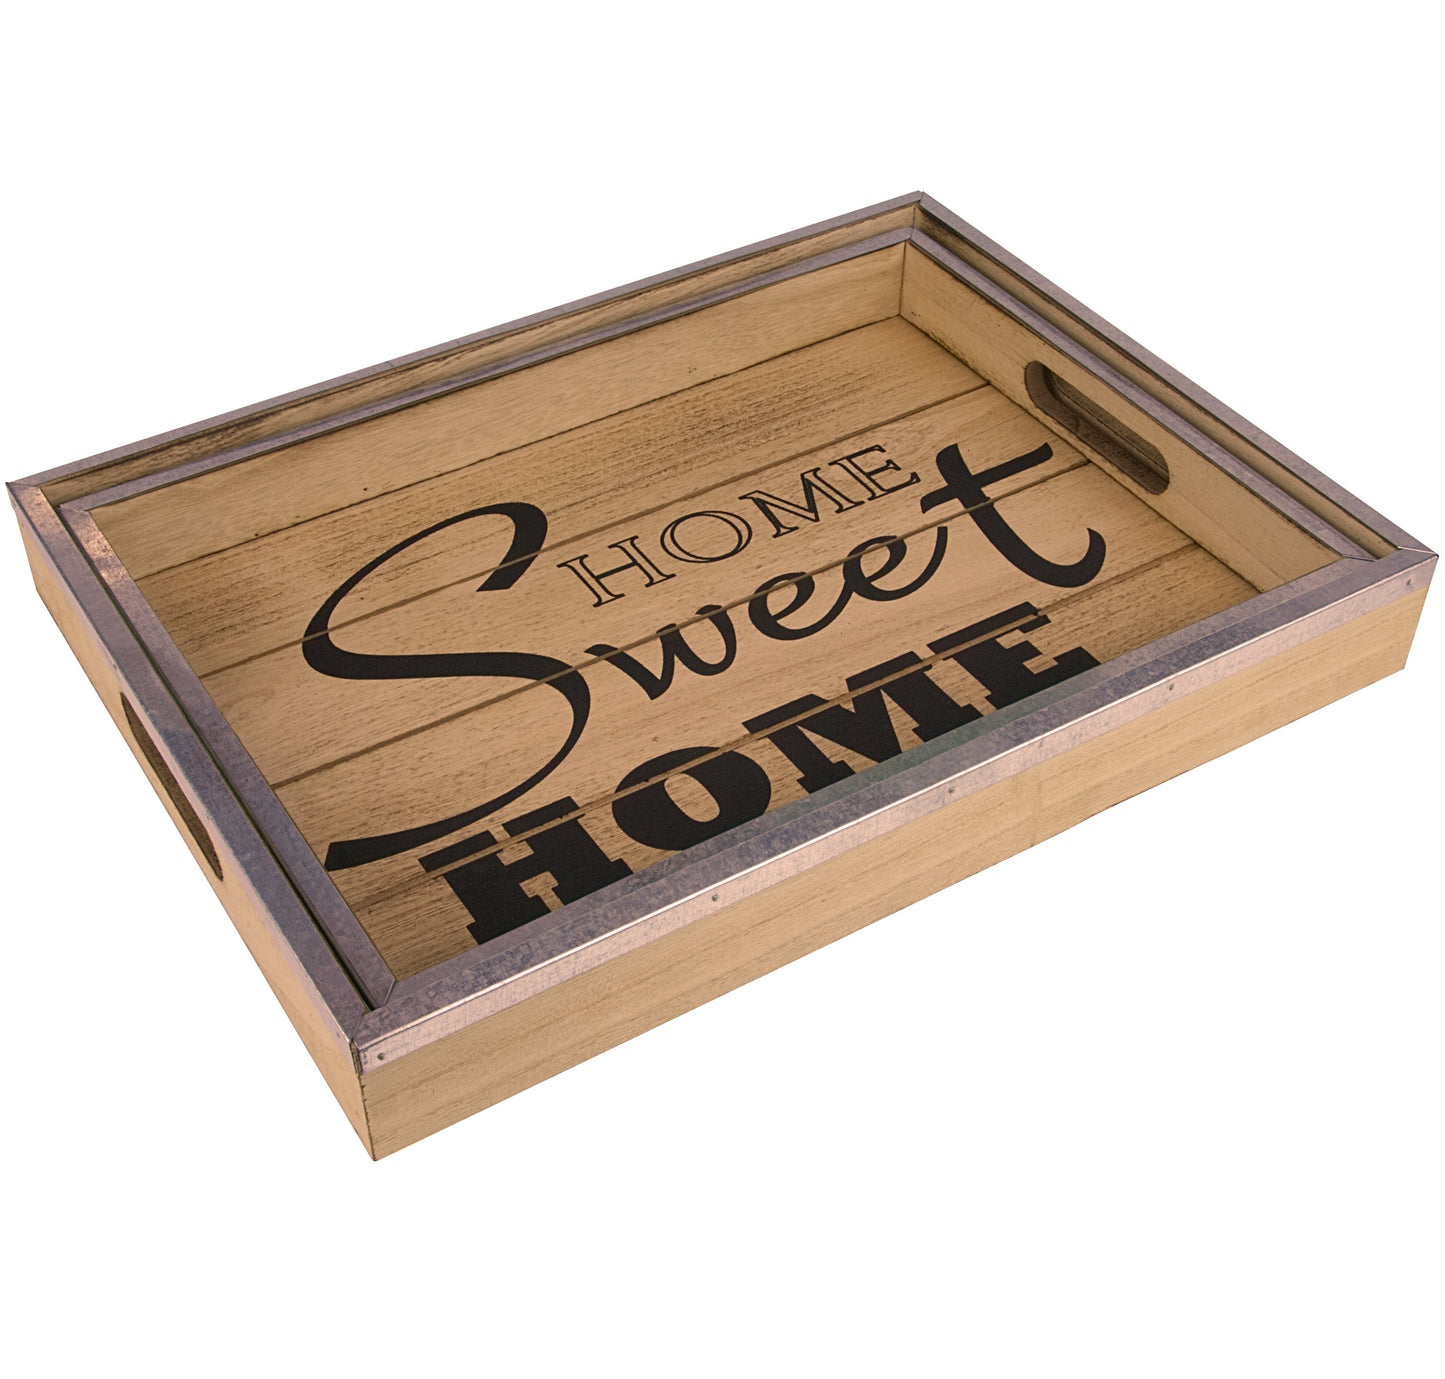 Decor Works Wooden Serving Trays with Metal Trim (Set of 2)